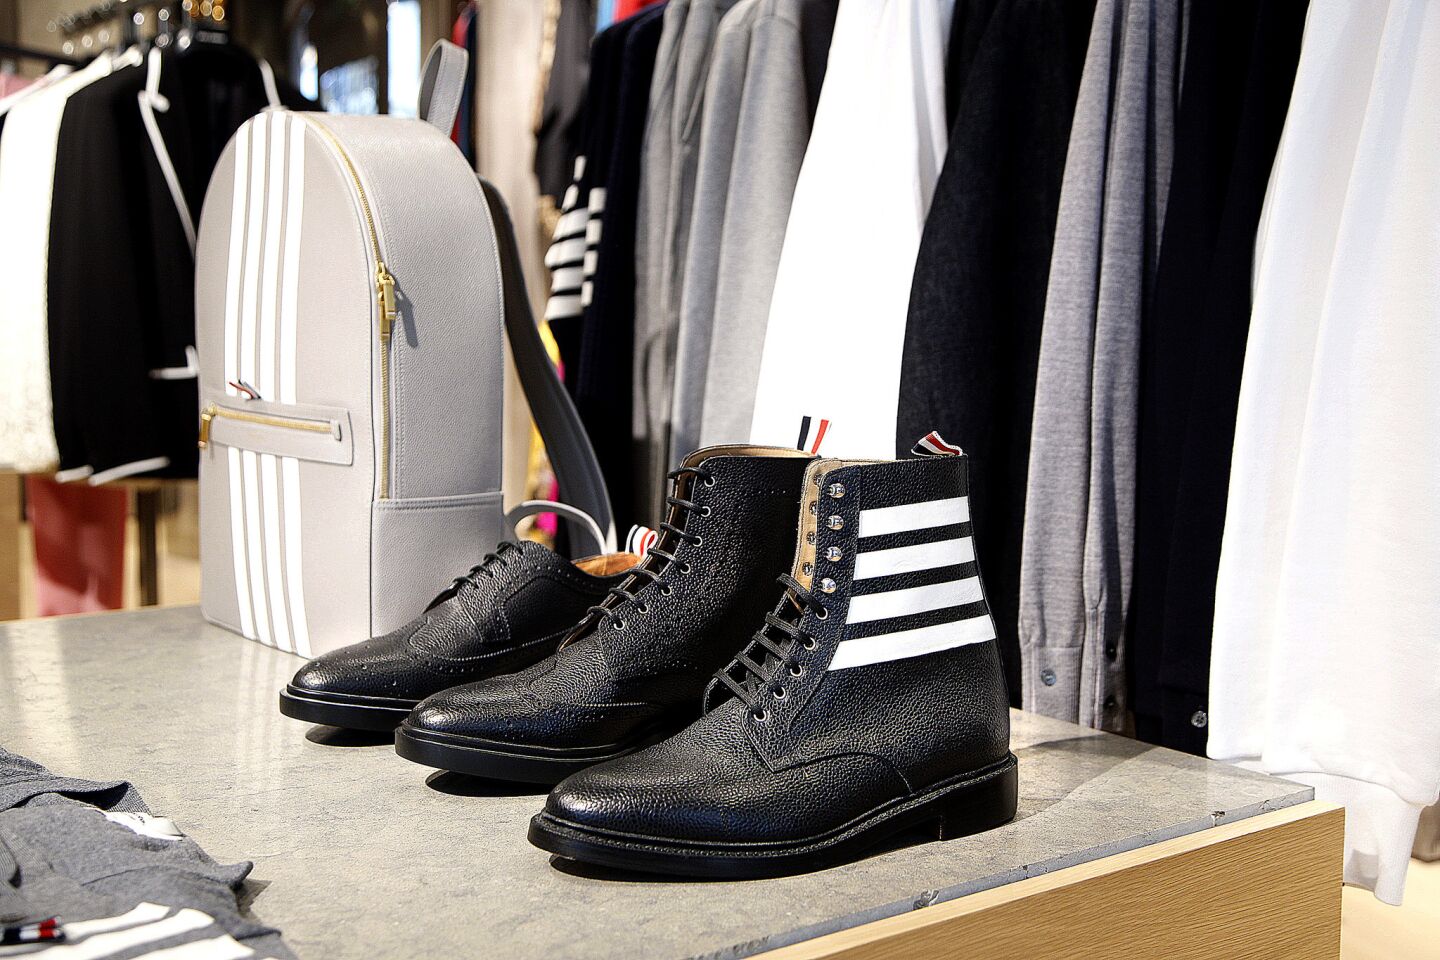 A selection of footwear for men and women as well as other goods such as bags are available at Traffic Los Angeles.